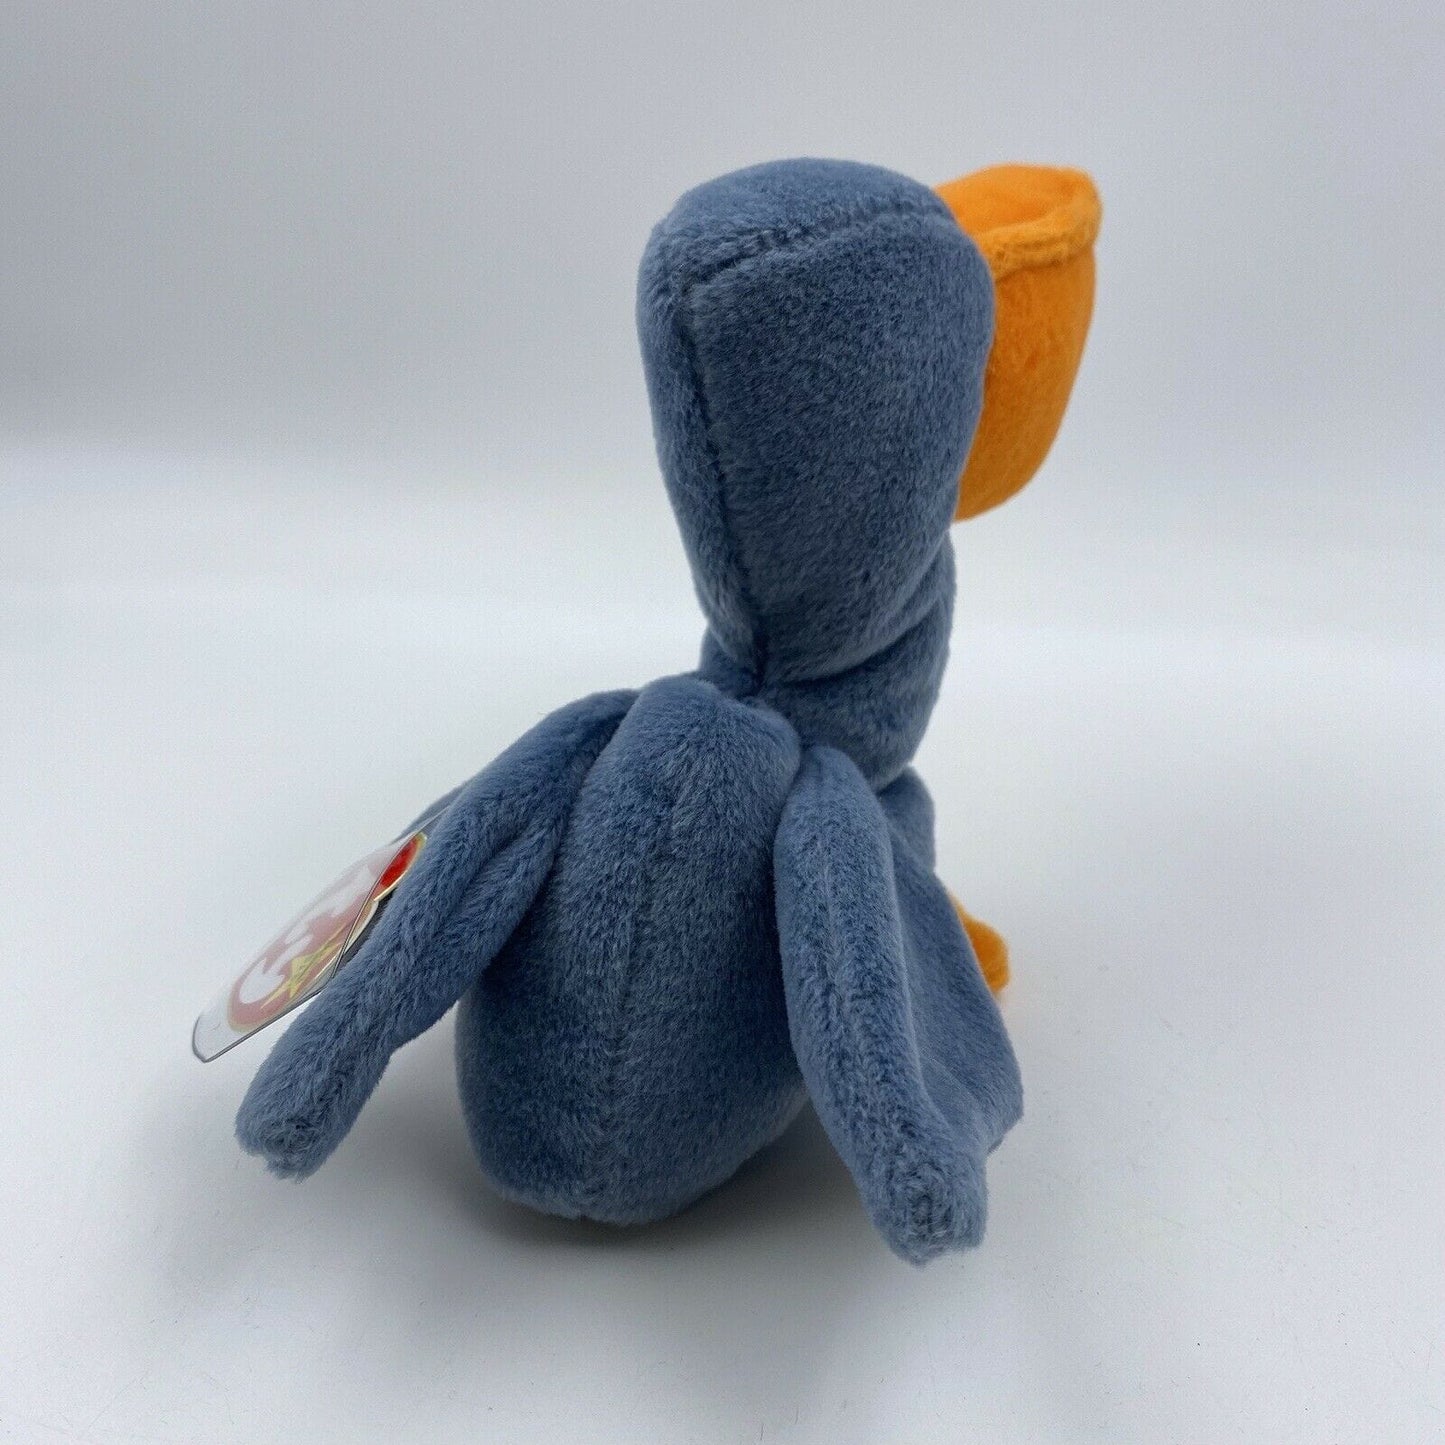 Ty Original Beanie Babies “Scoop” The Pelican 1996 MINT Condition - Tag Errors